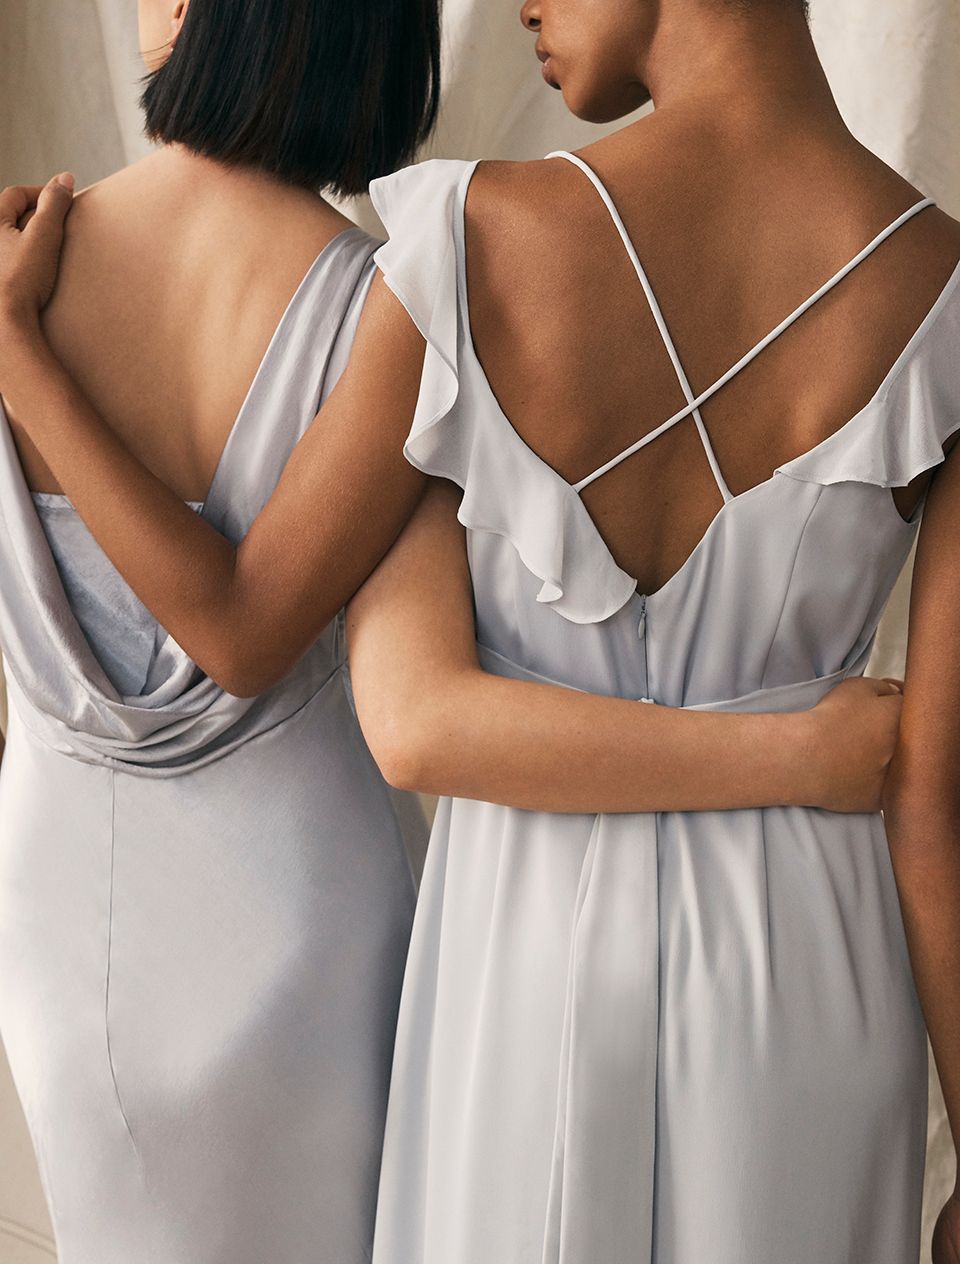 Two models from the back in bridesmaid dresses